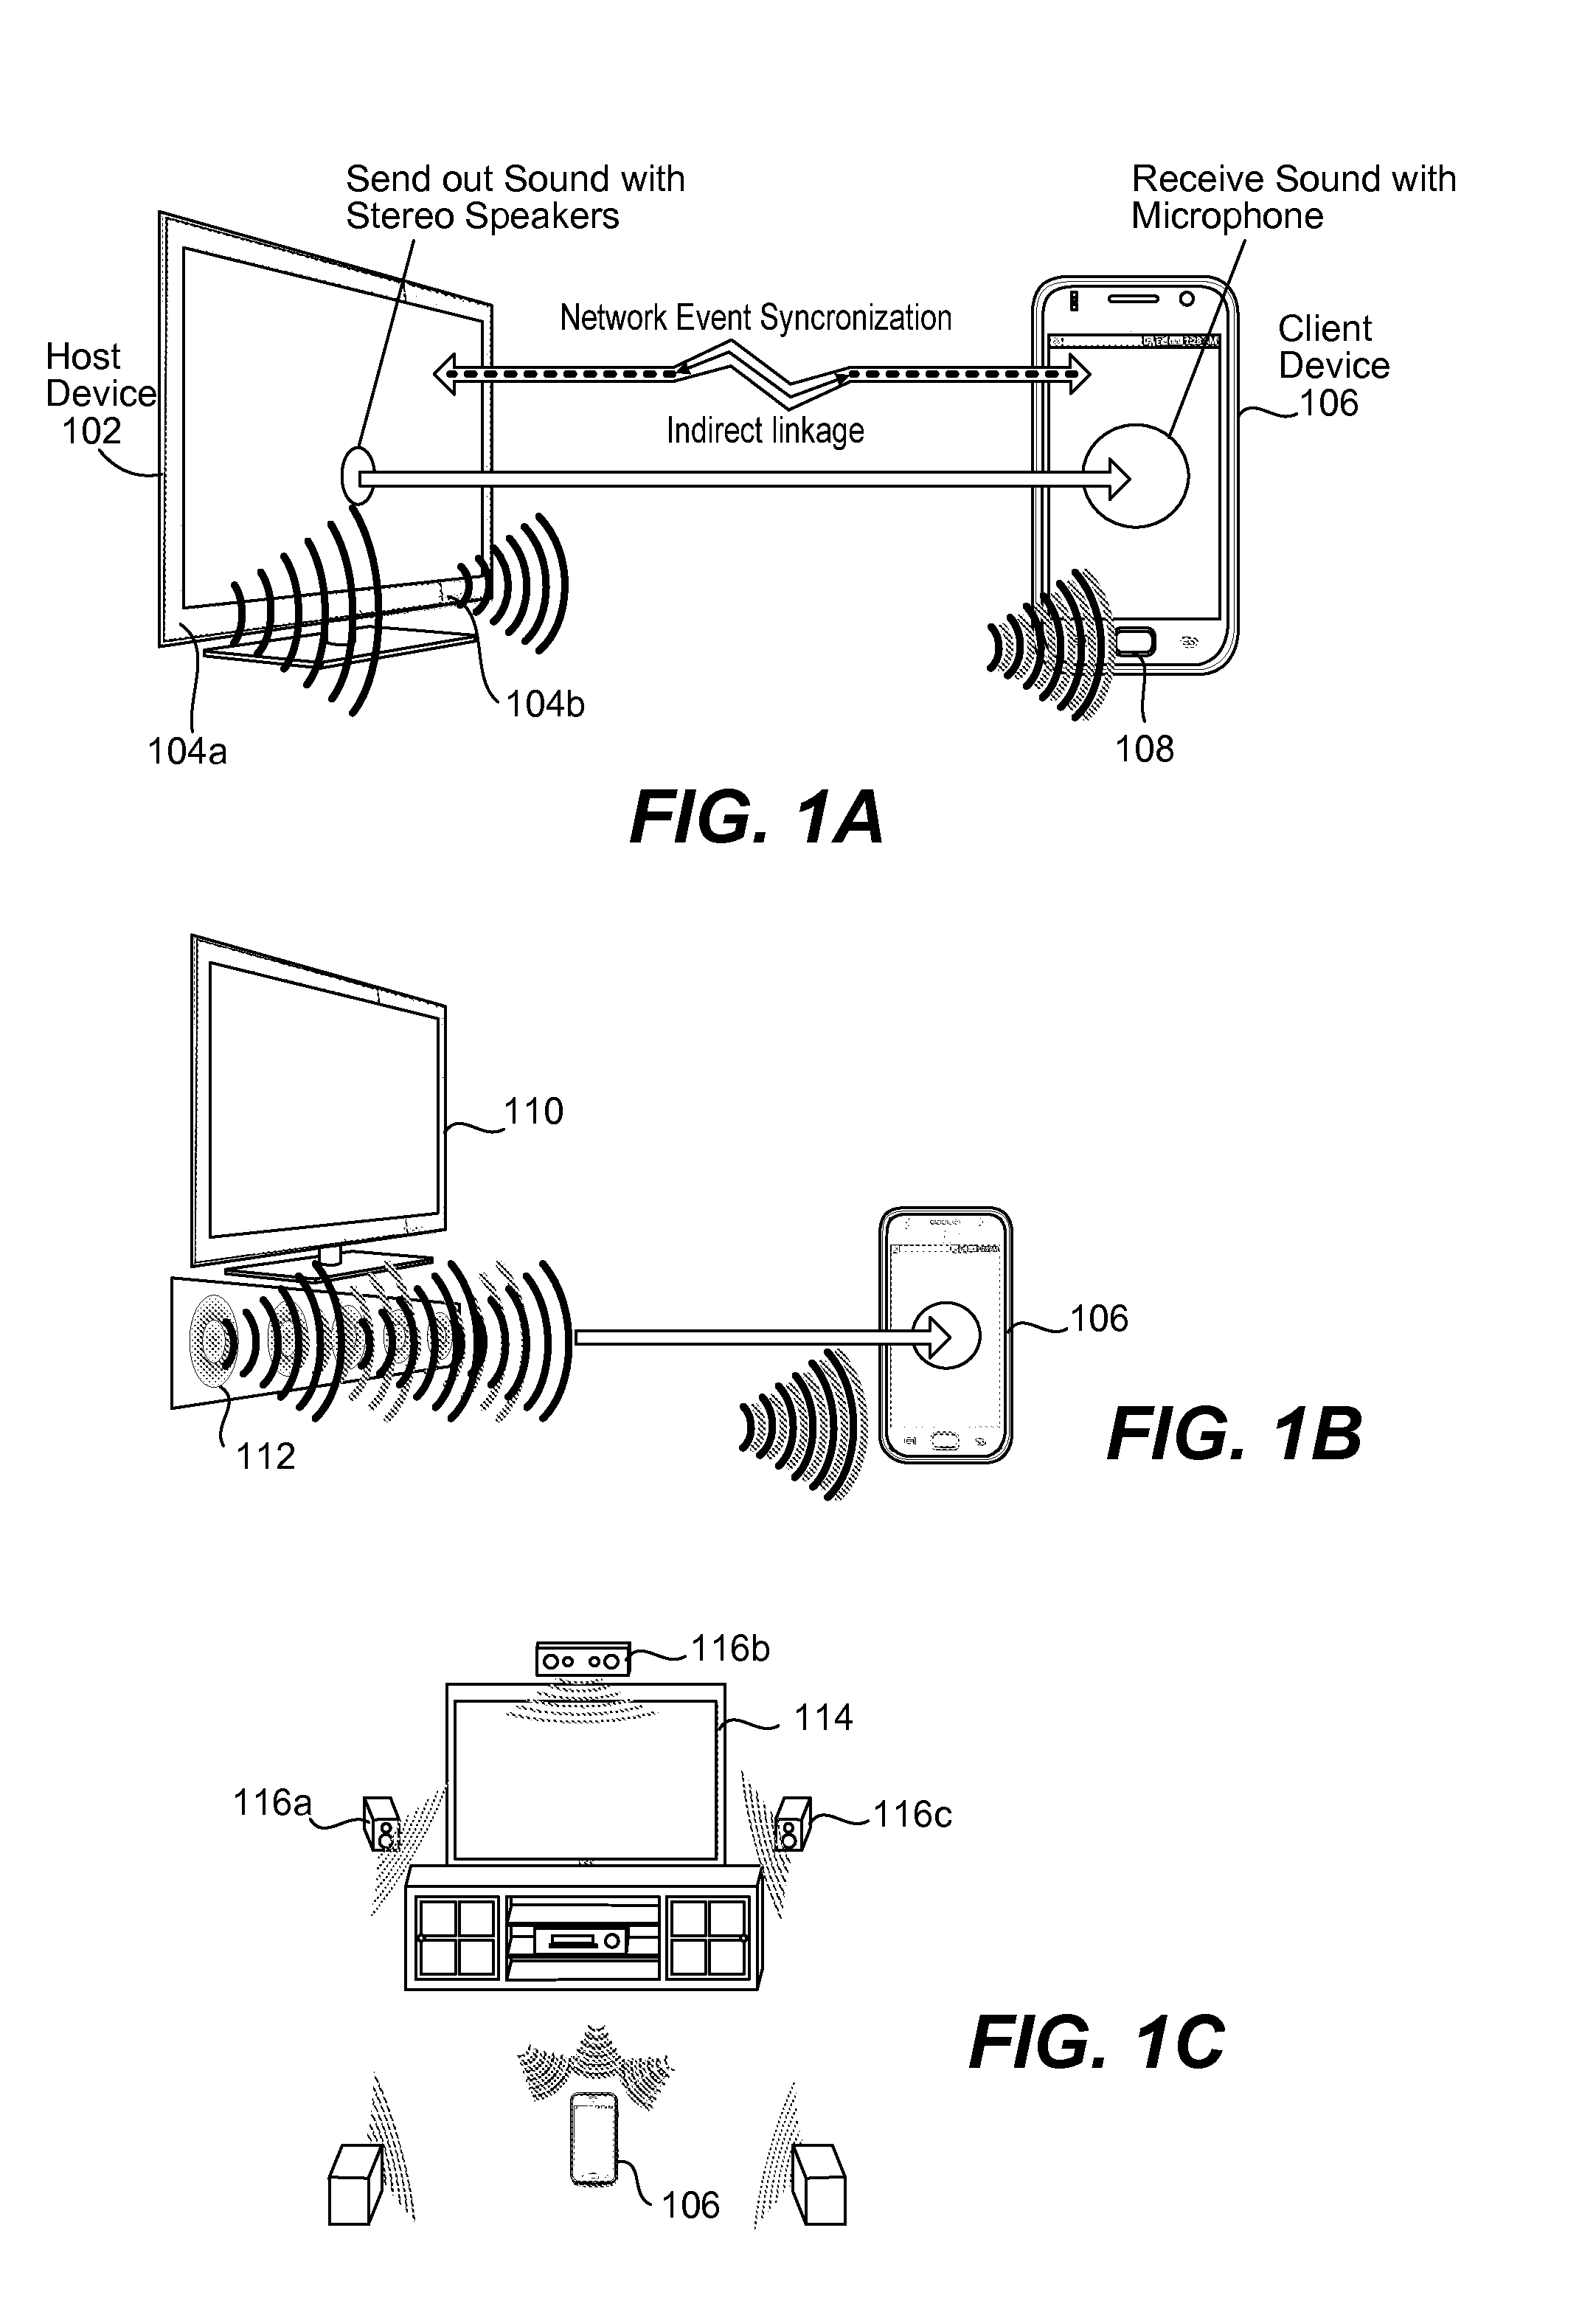 Position determination of devices using stereo audio